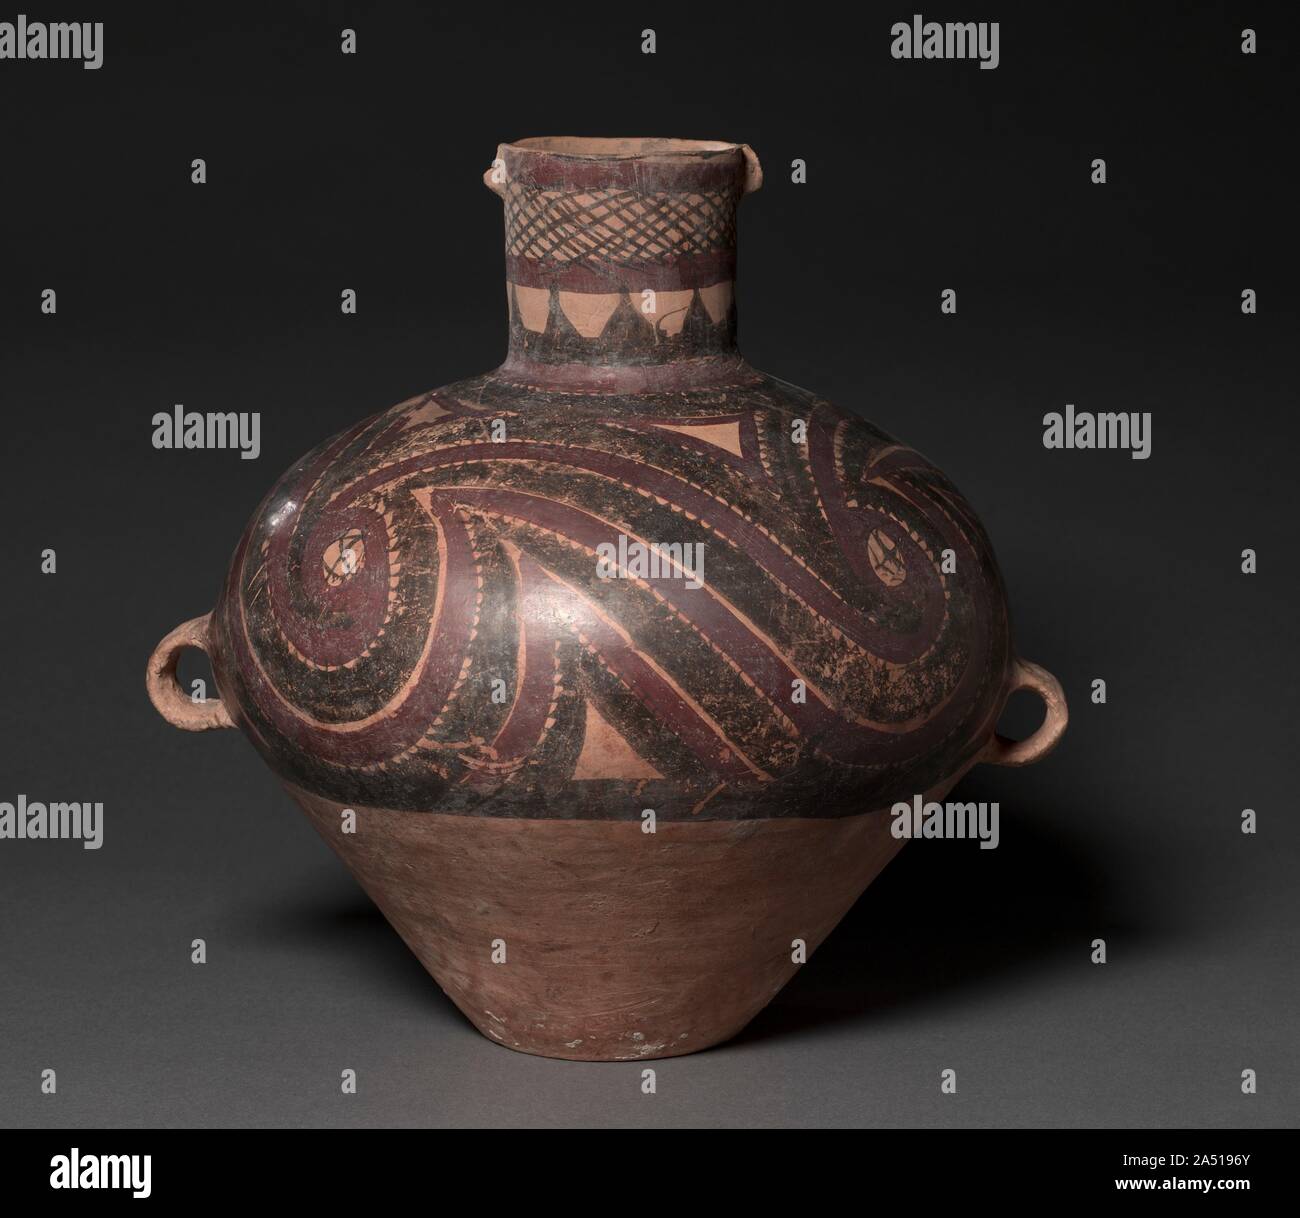 Jar with Curvilinear Designs, 2650-2350 BC. Stock Photo